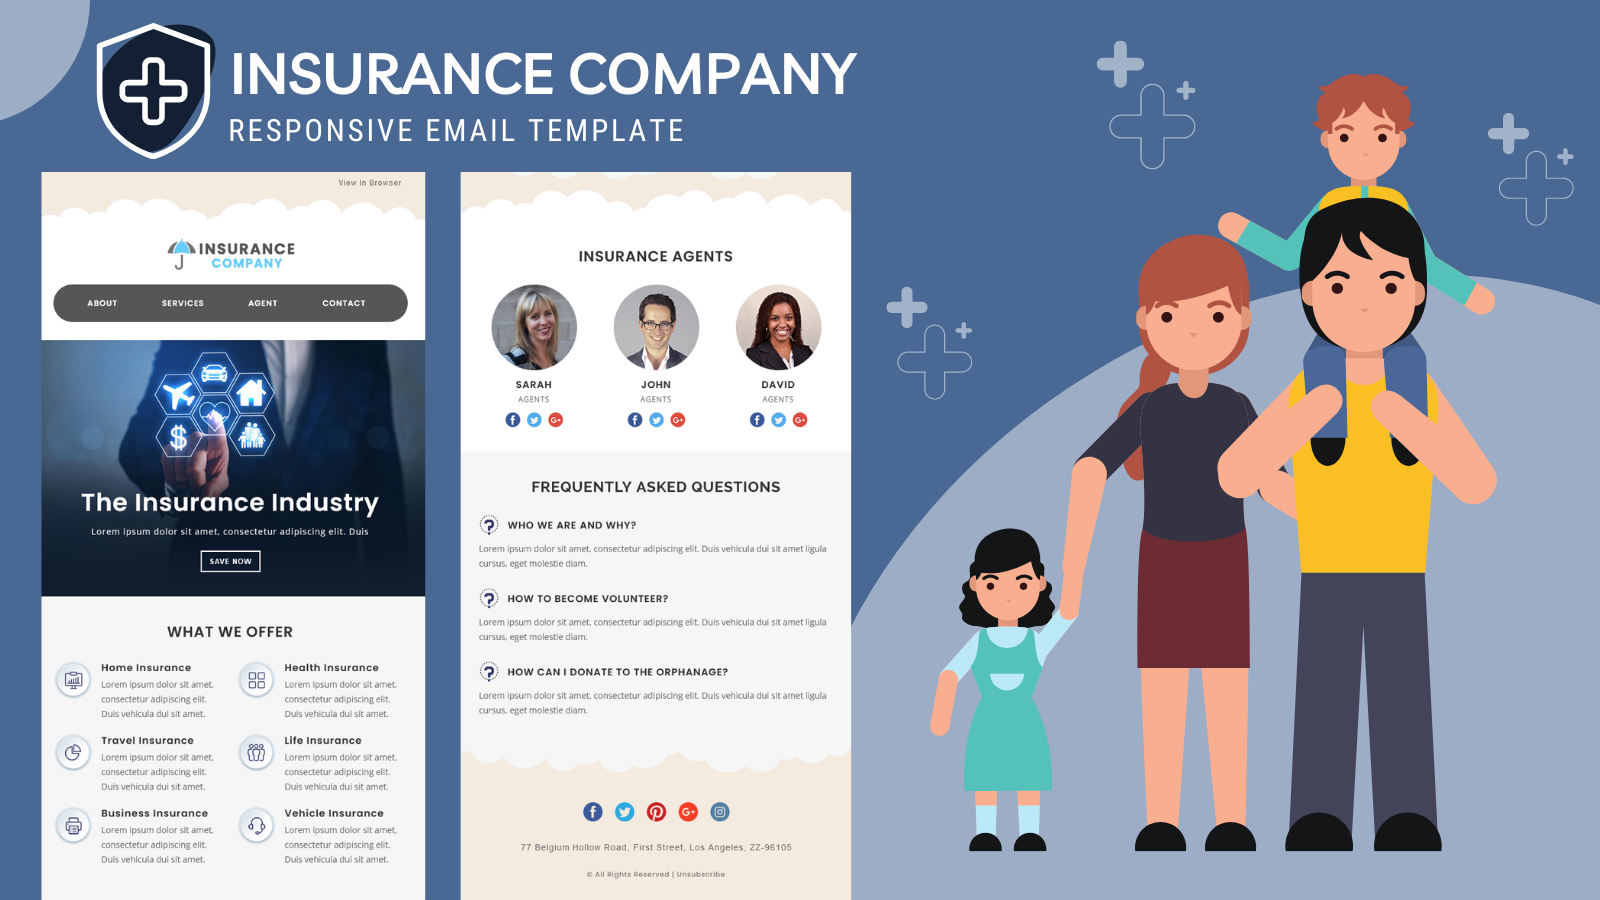 Insurance Company – Responsive Email Template